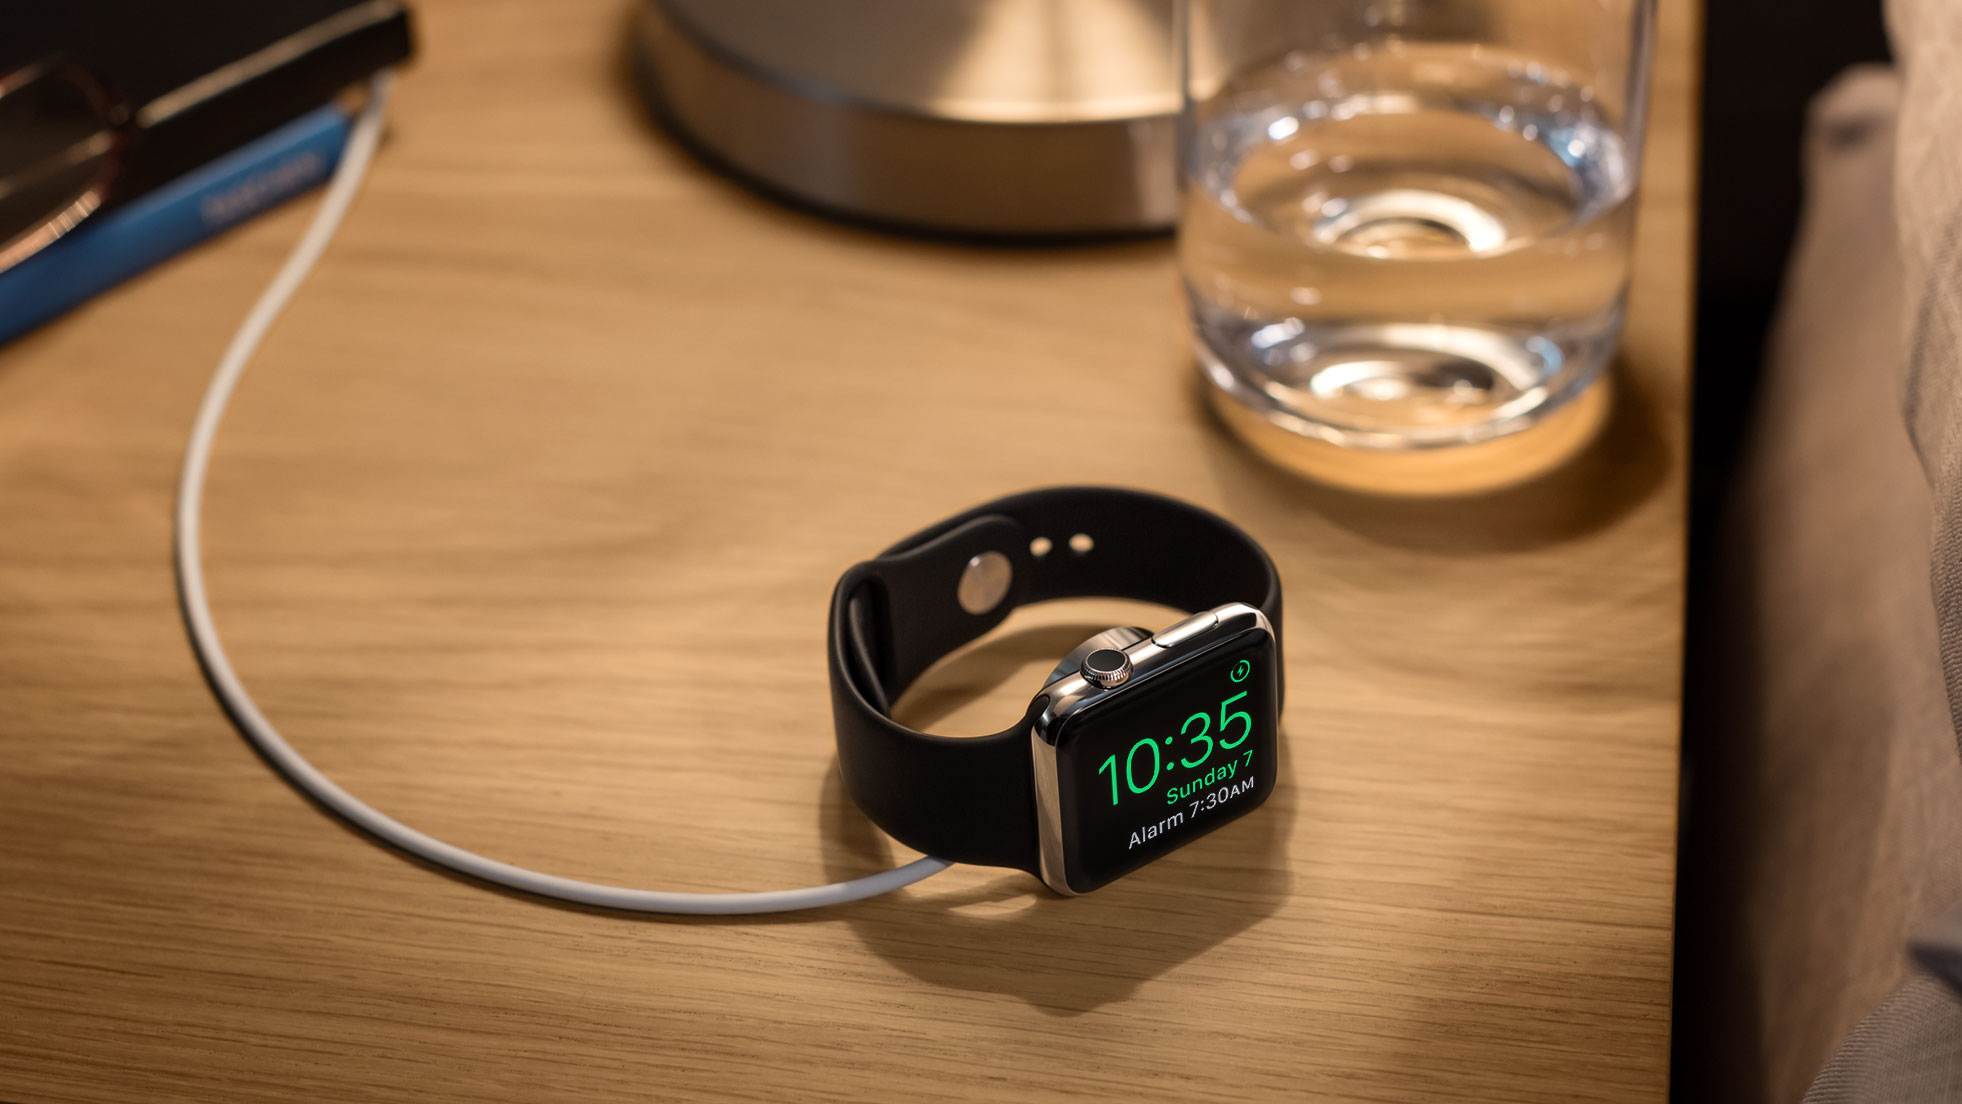 WWDC 2015: watchOS 2 is presented and will be released to everyone soon